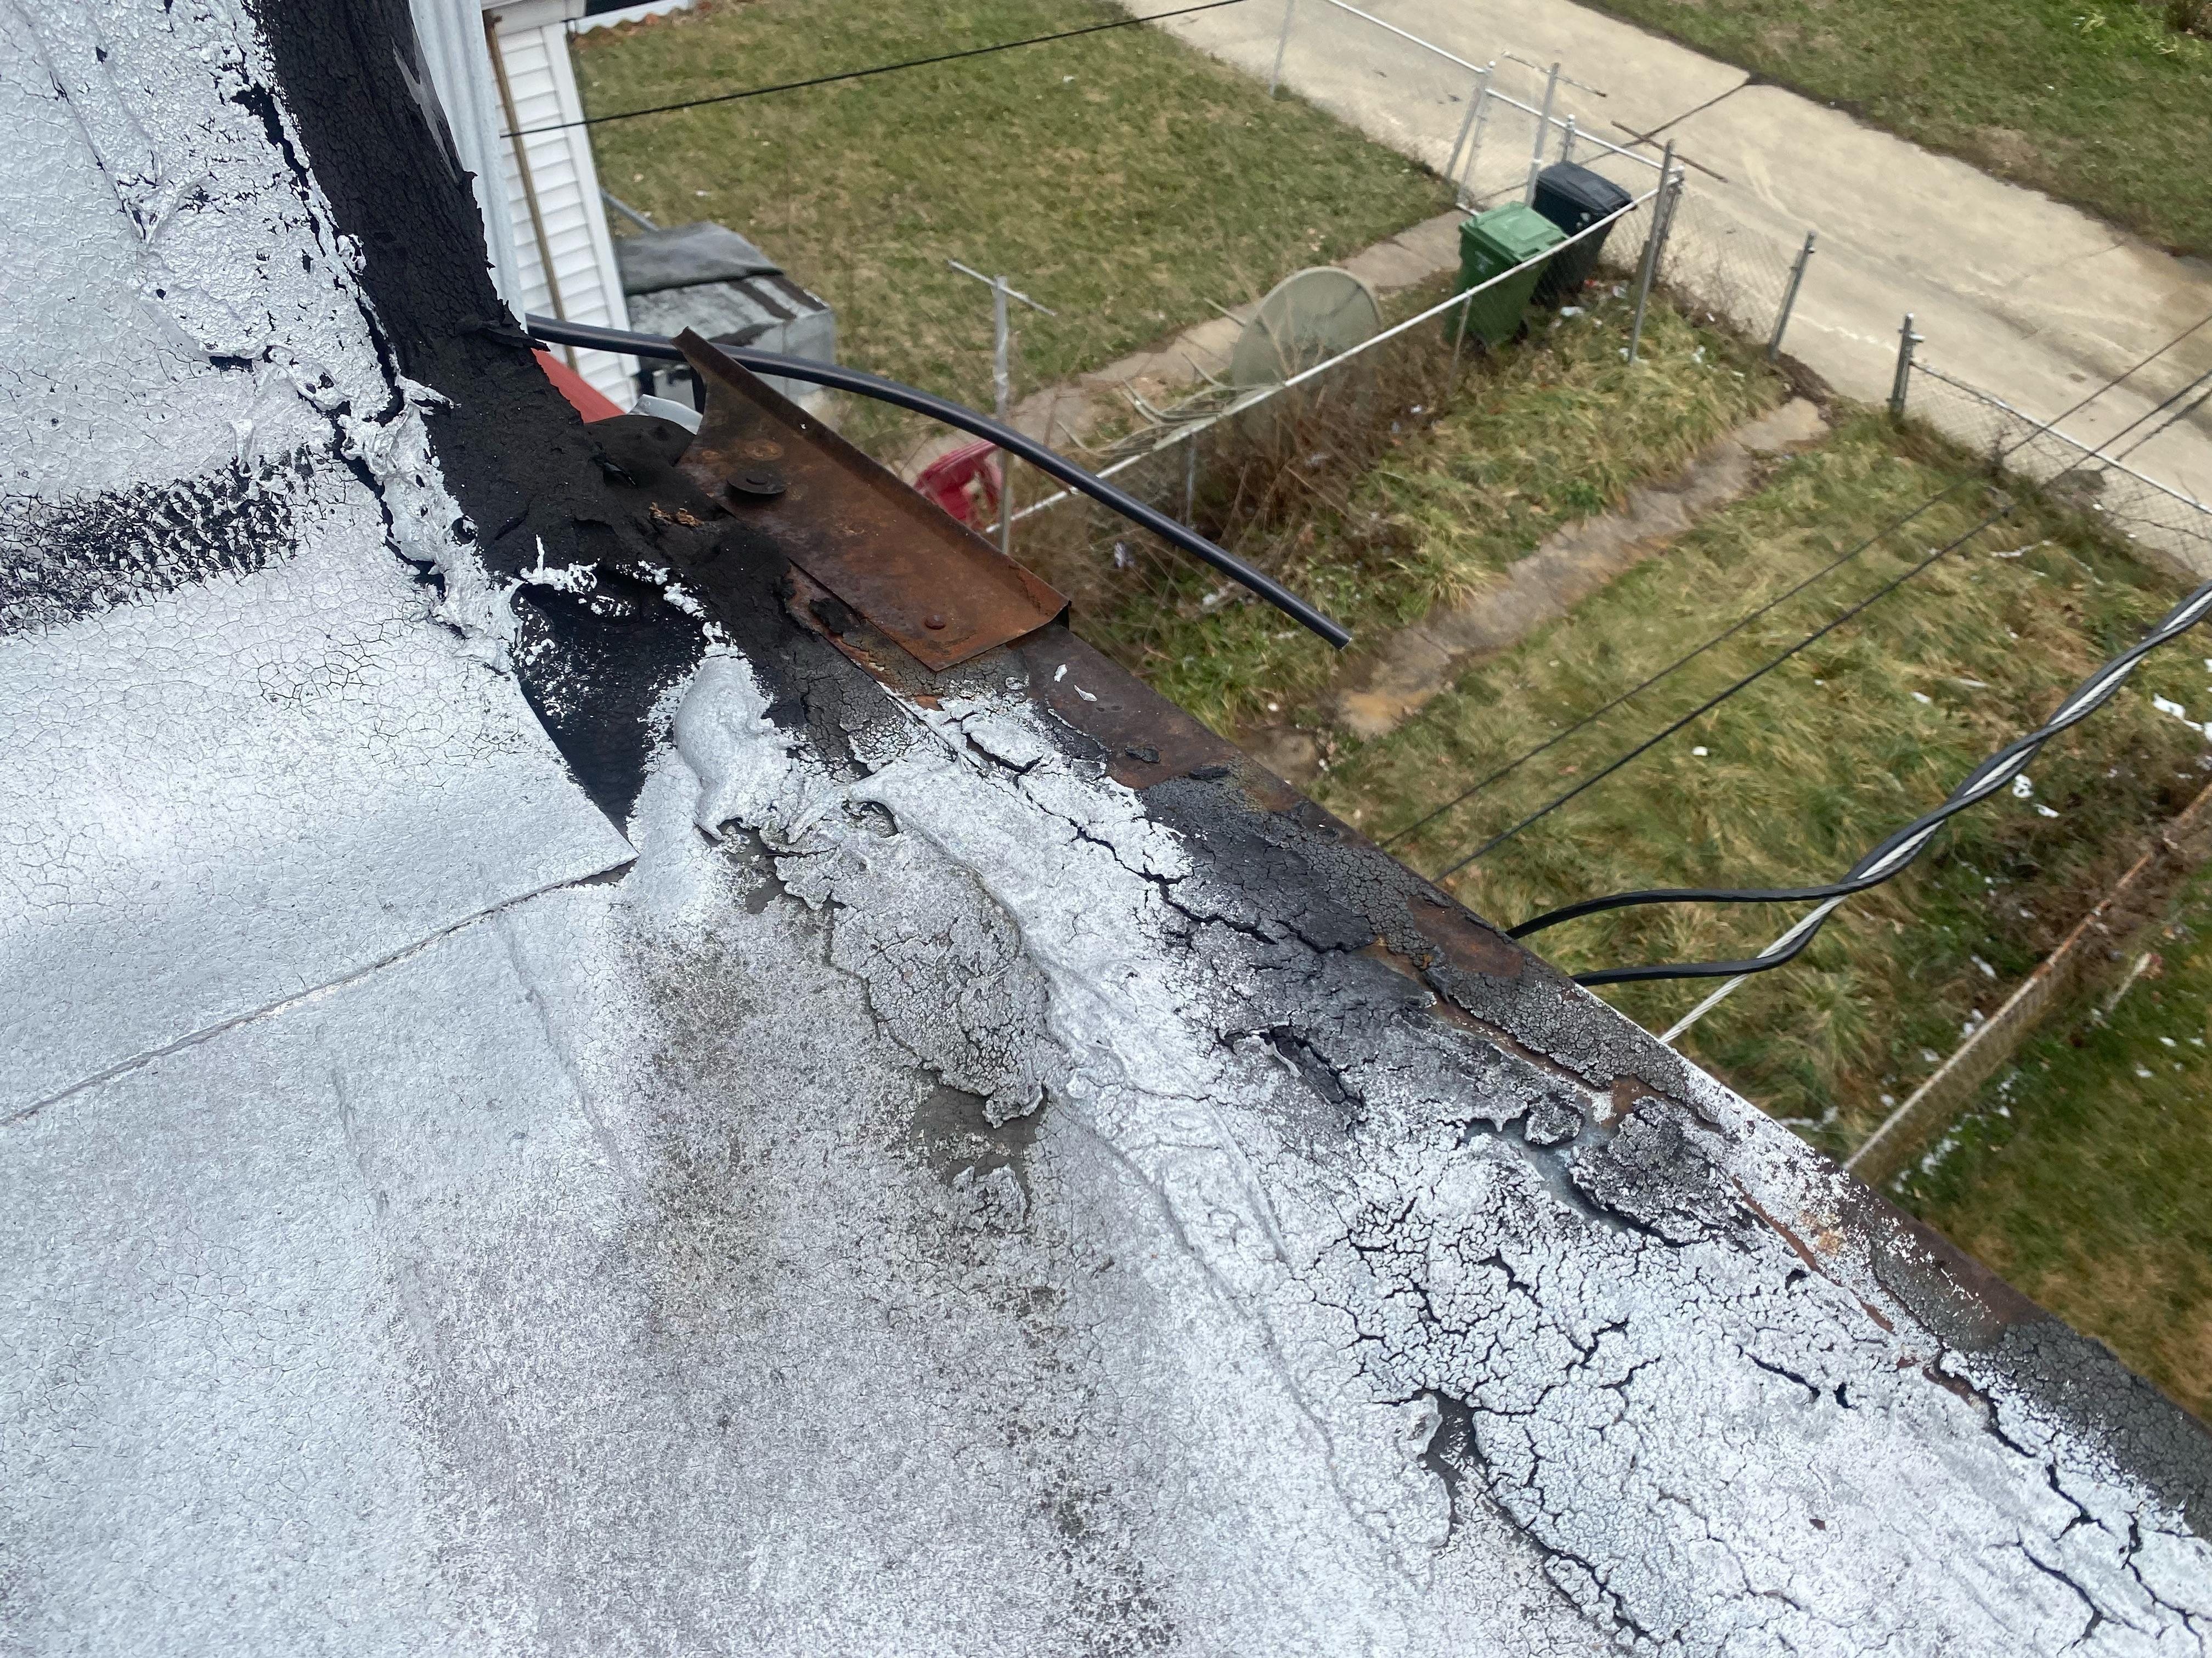 Flat roof damage allowing water to get inside causing leaks